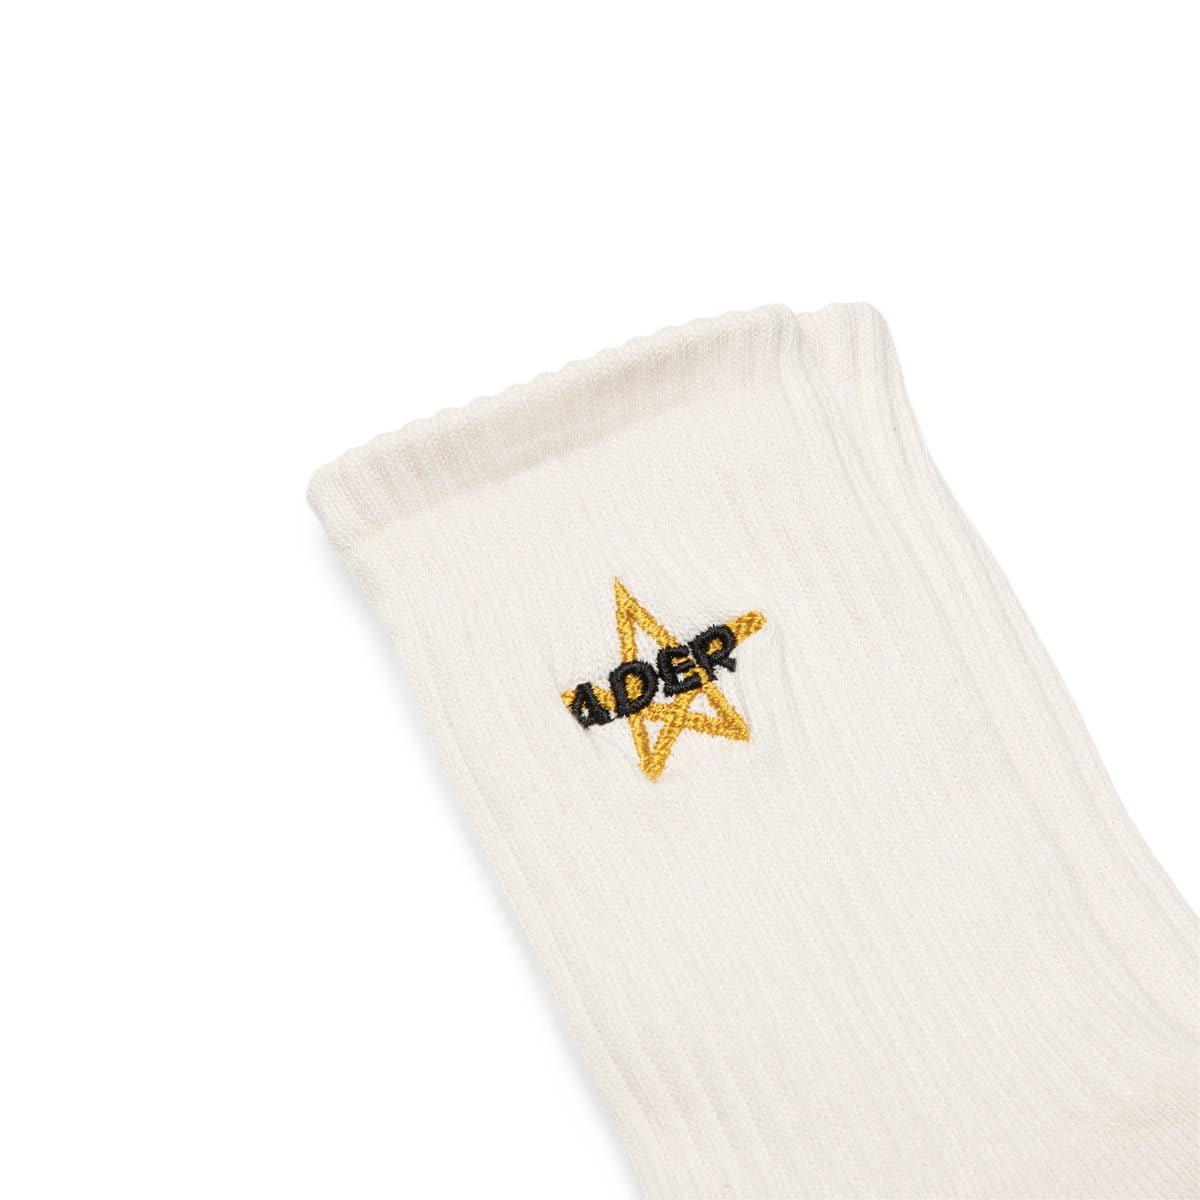 Ader Error Bags & Accessories WHITE / OS STAR EMBROIDERY SOCKS